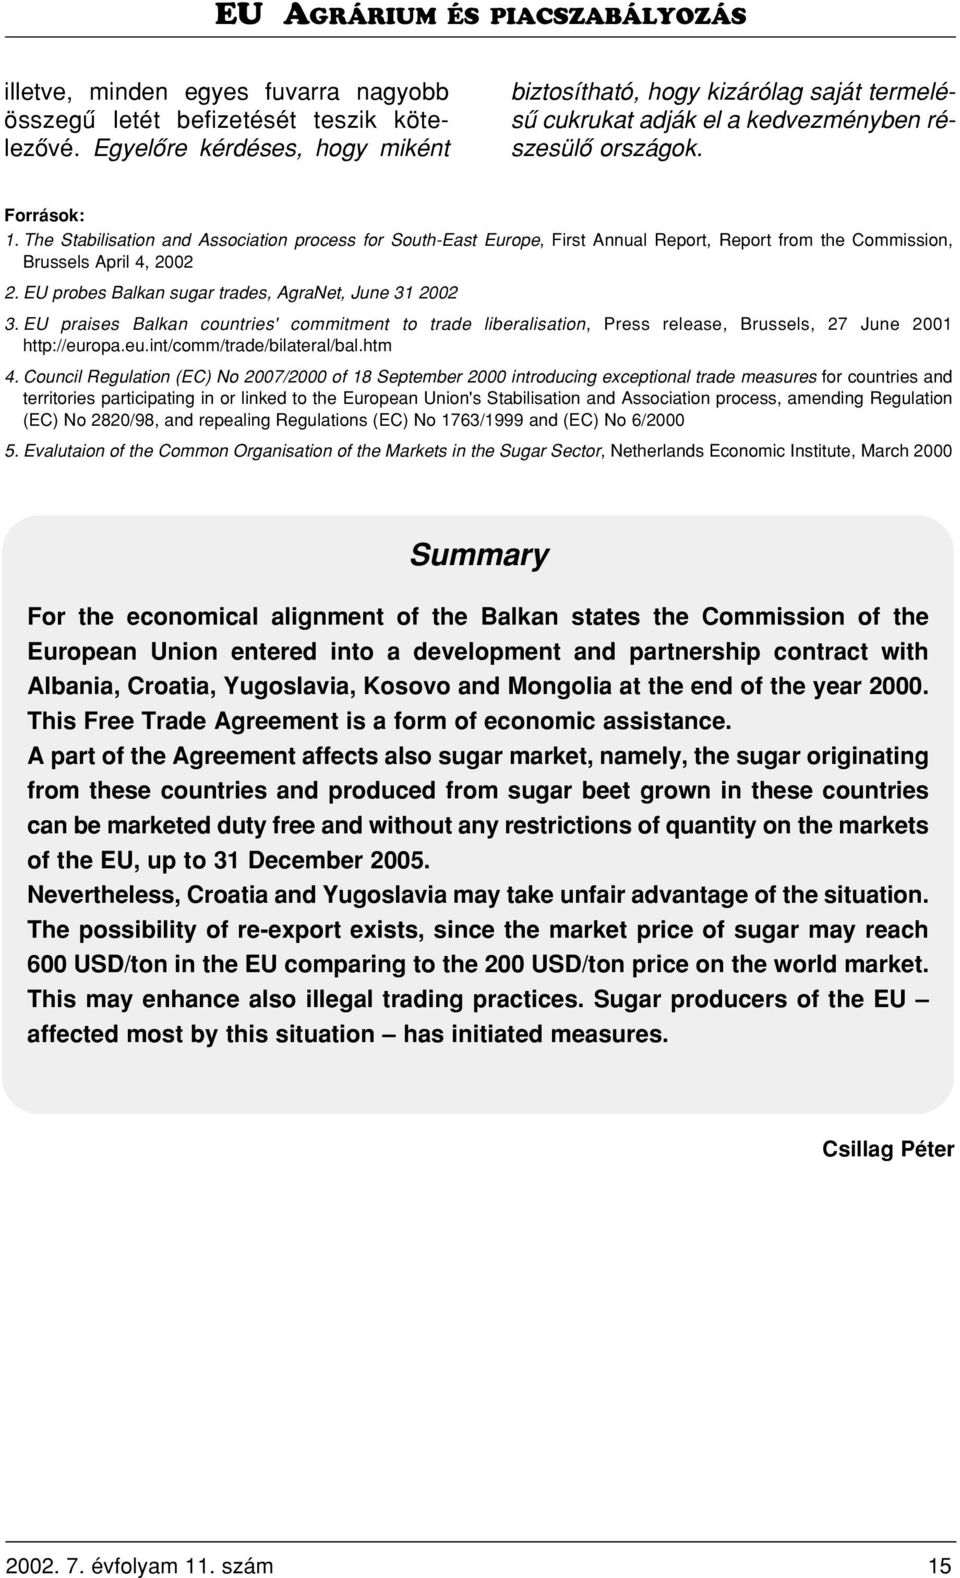 The Stabilisation and Association process for South-East Europe, First Annual Report, Report from the Commission, Brussels April 4, 2002 2. EU probes Balkan sugar trades, AgraNet, June 31 2002 3.